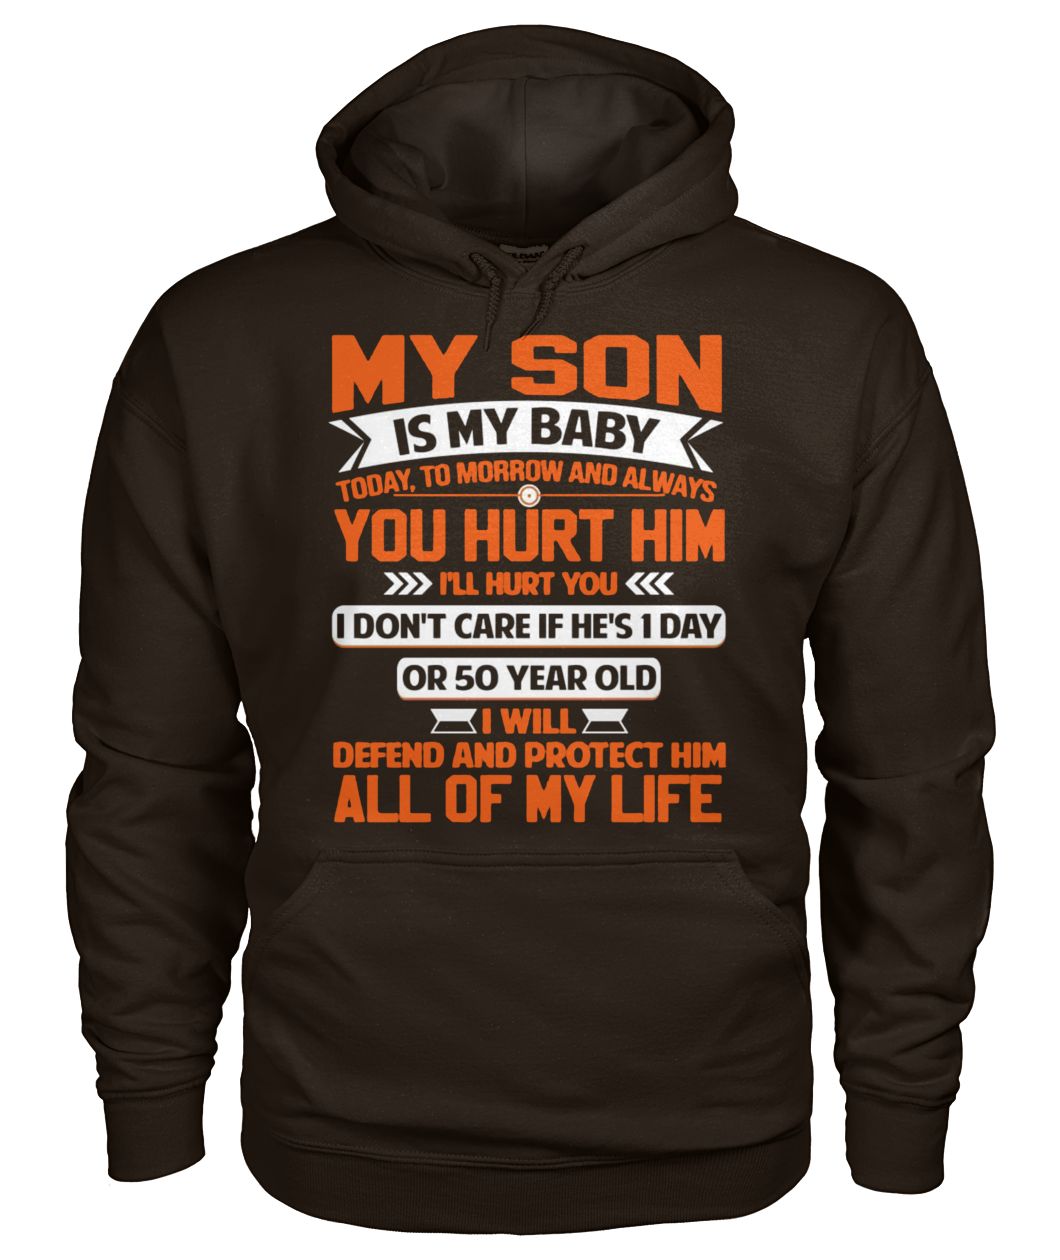 My son is my baby today tomorrow and always you hurt him I'll hurt you gildan hoodie